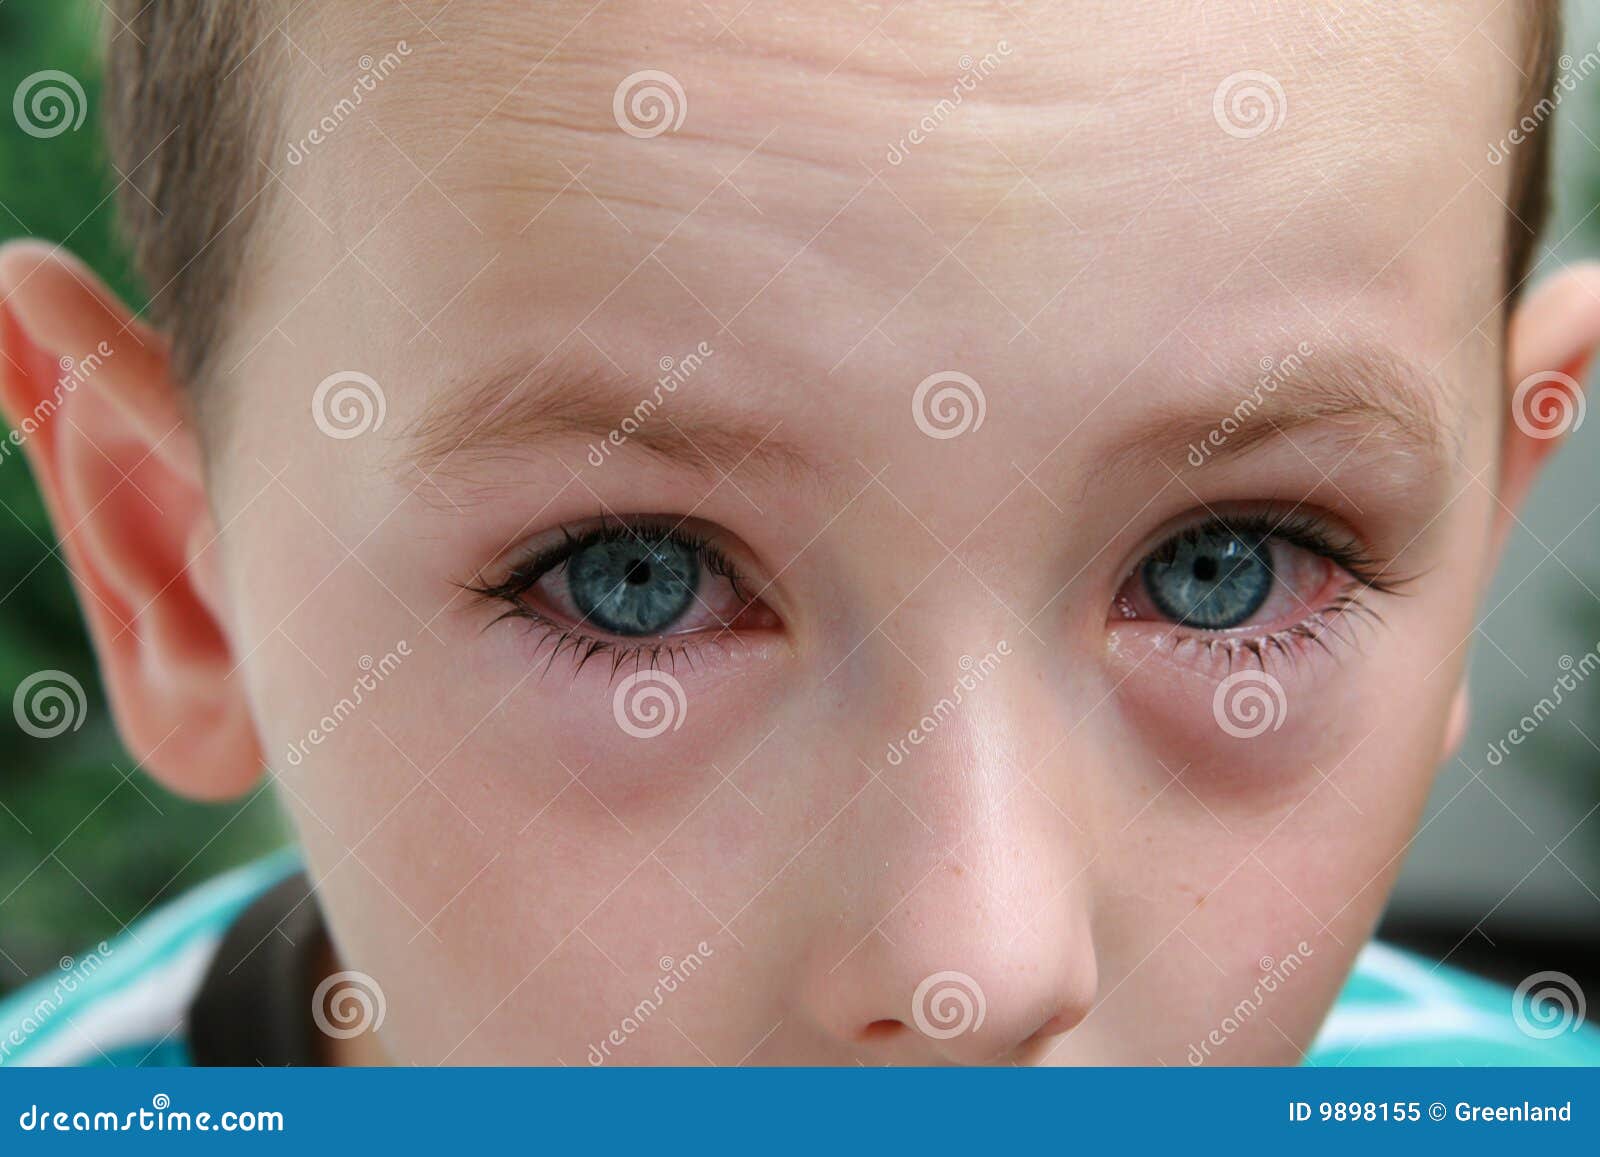 allergy and conjunctivitis